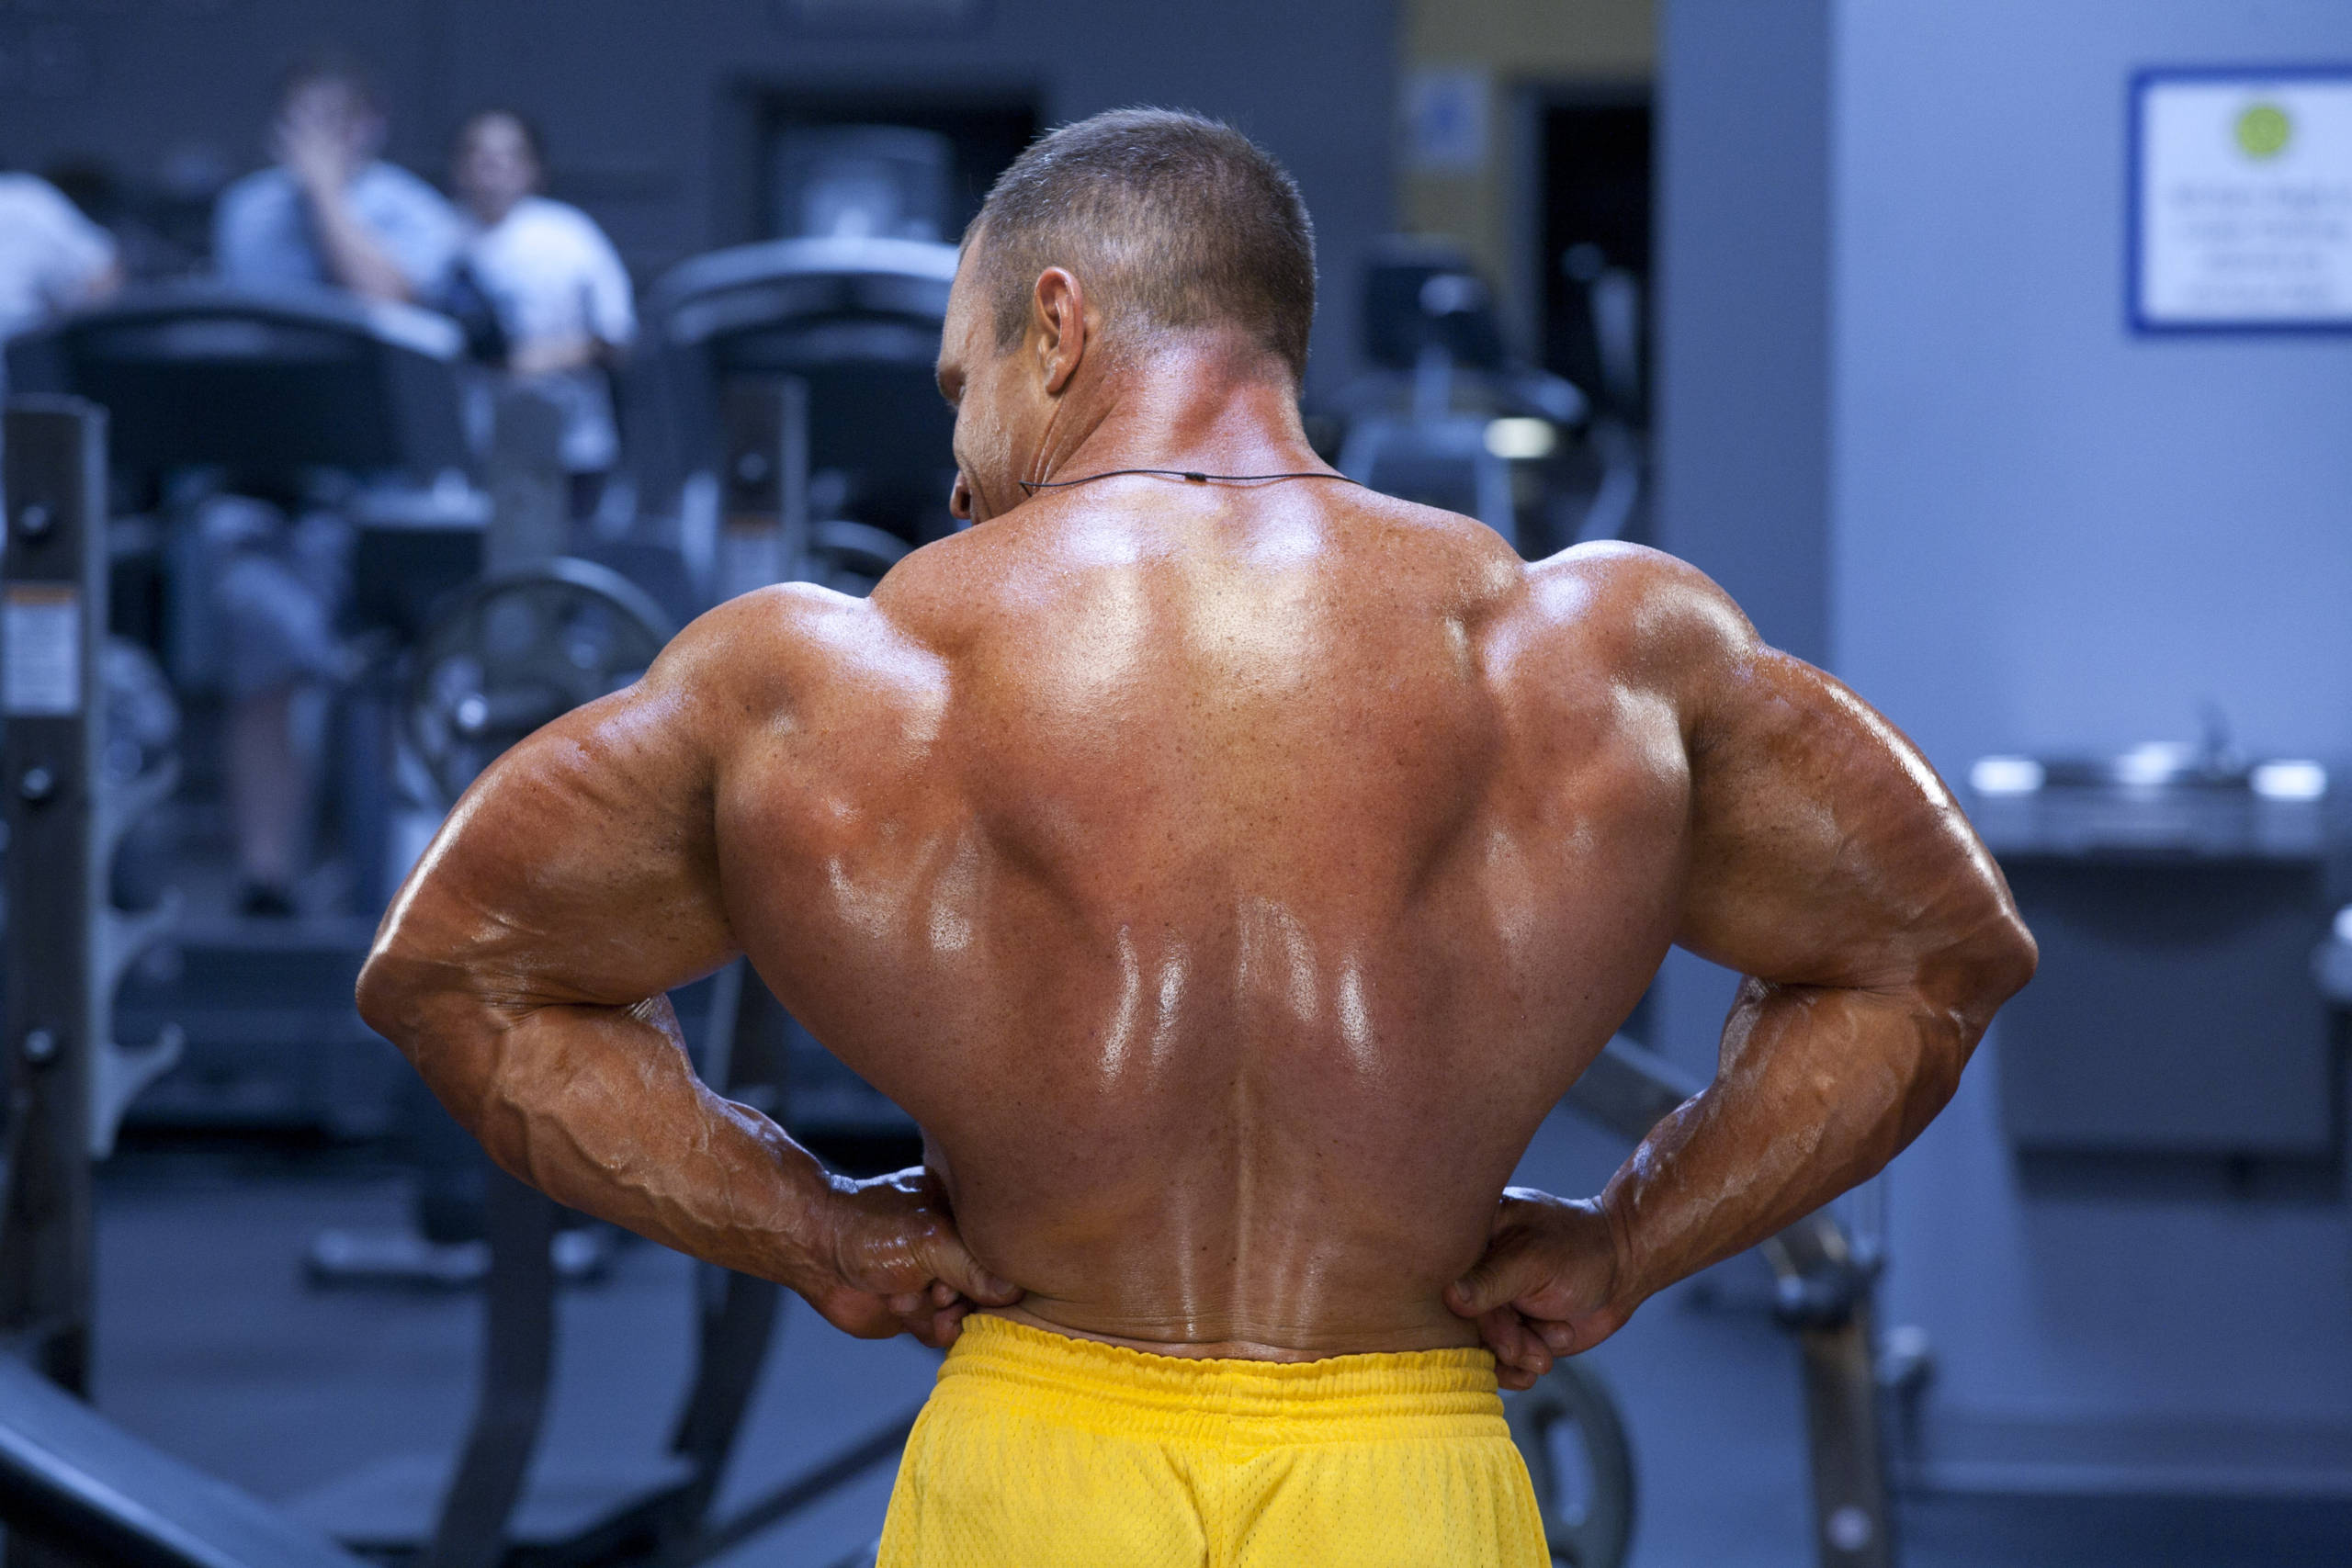 Con Demetriou rear lat spread and thick back structure.